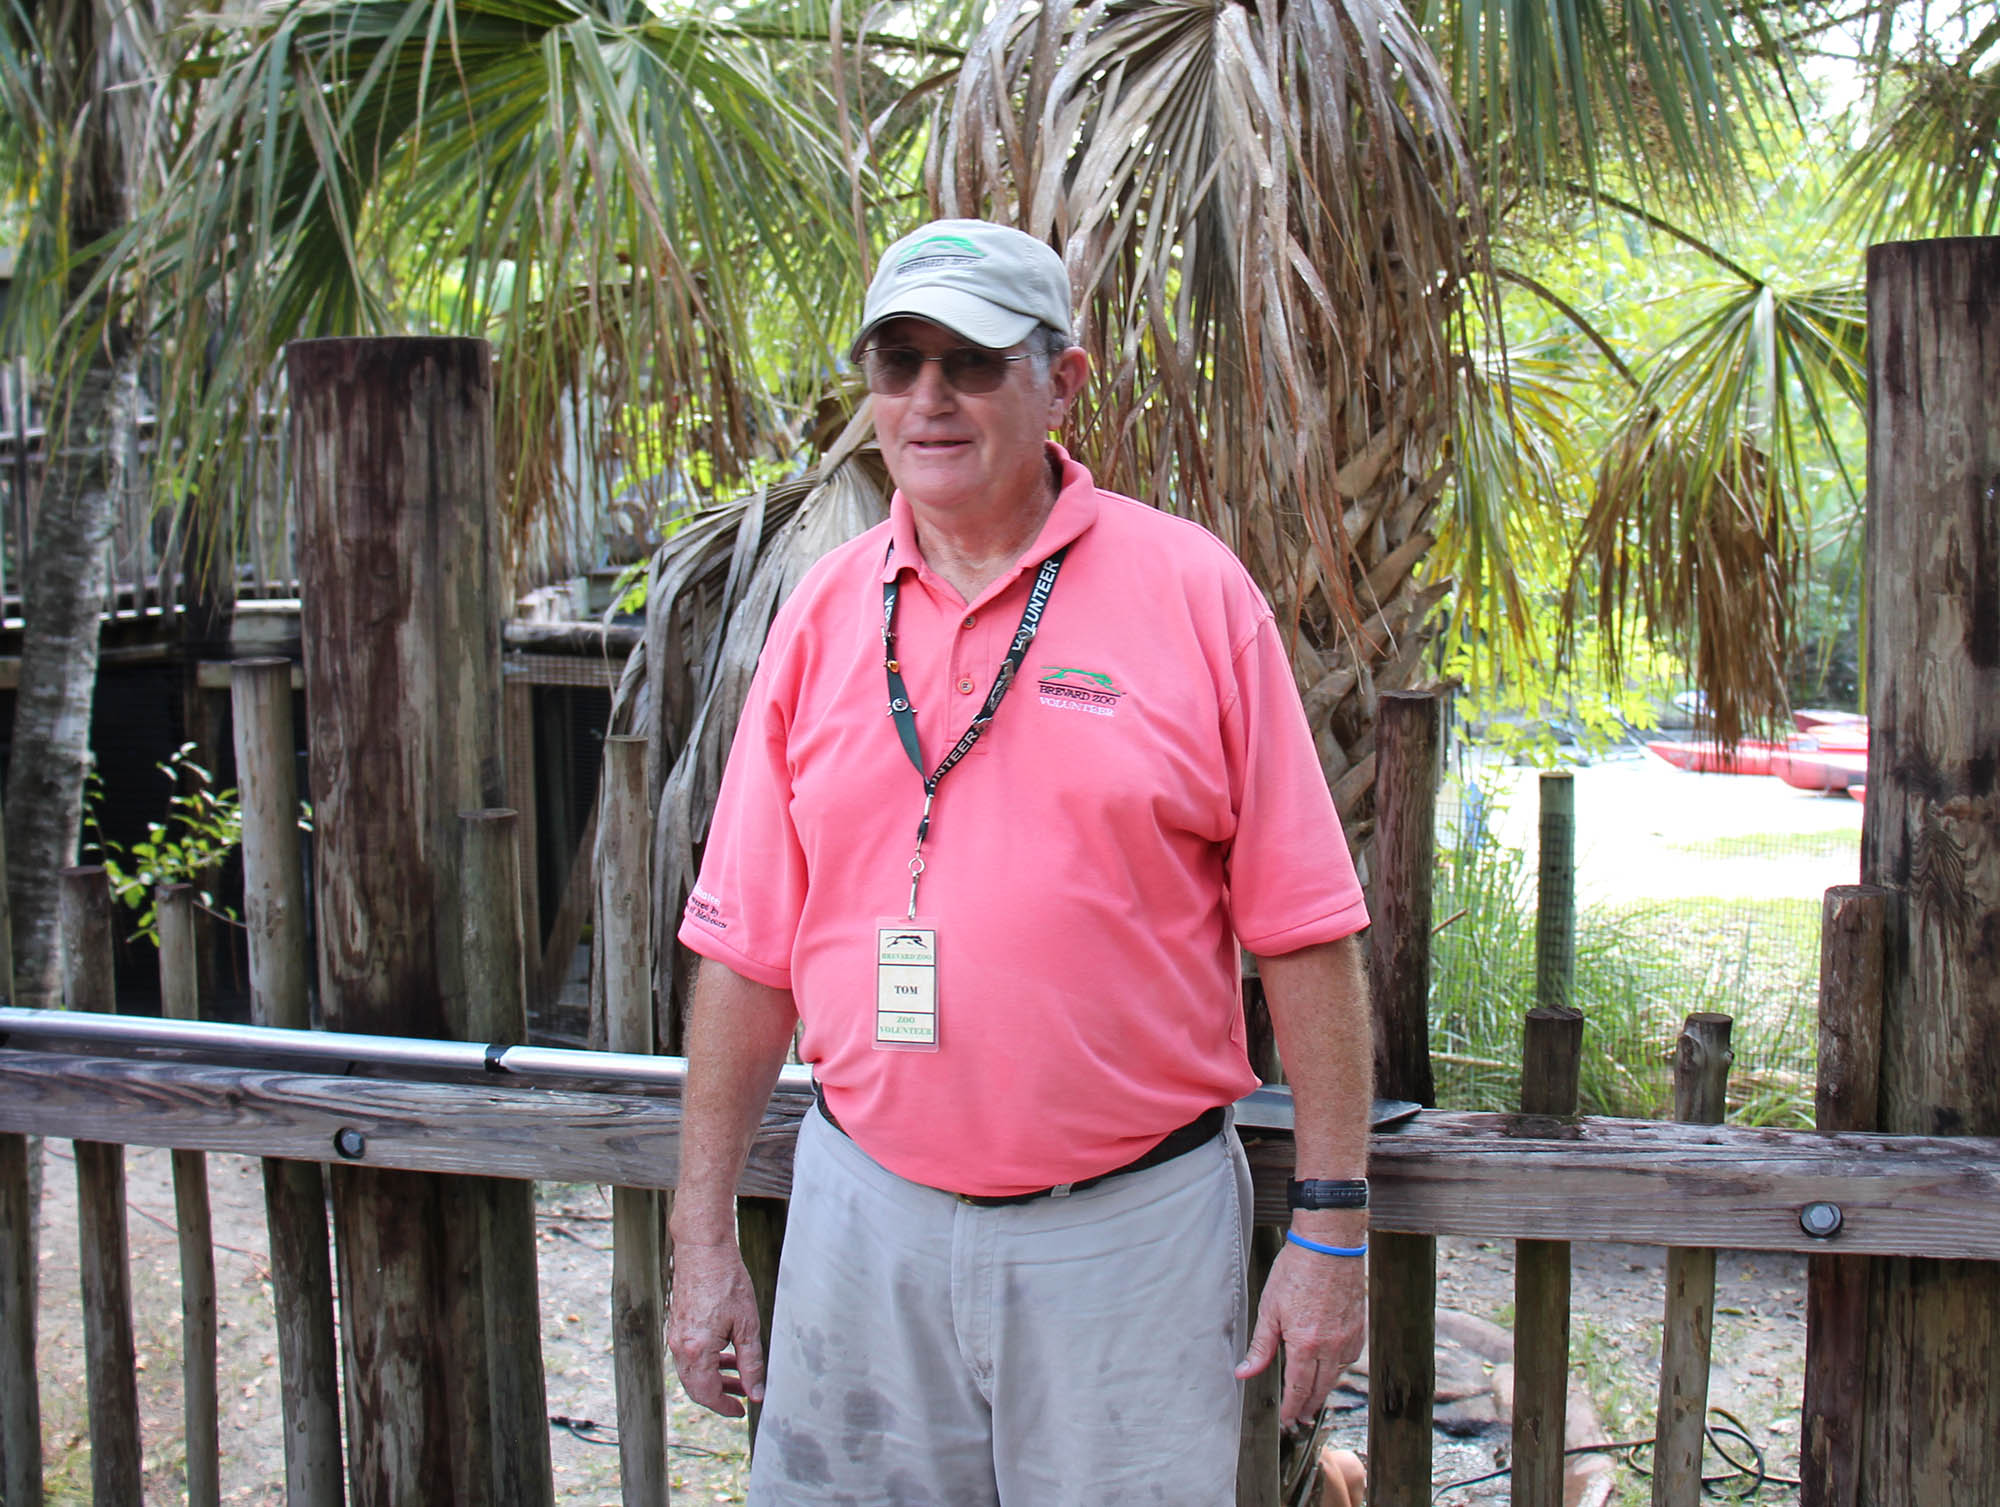 Tim, our awesome volunteer tour guide, at the Brevard Zoo